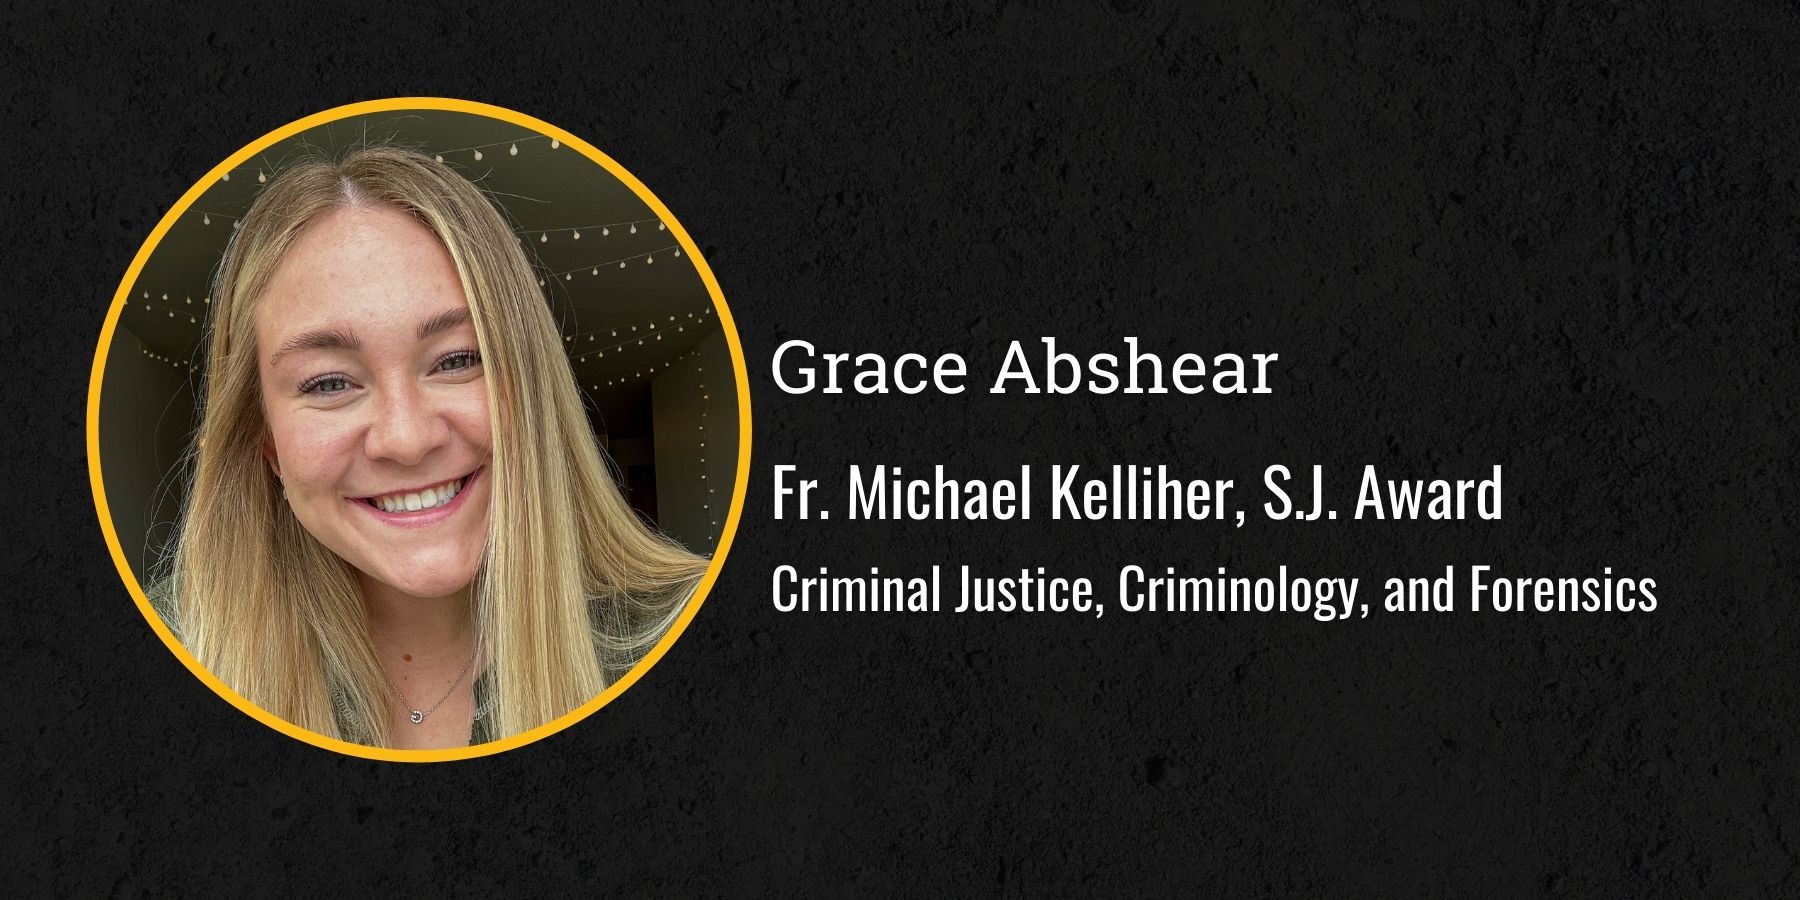 Photo of Grace Abshear and text